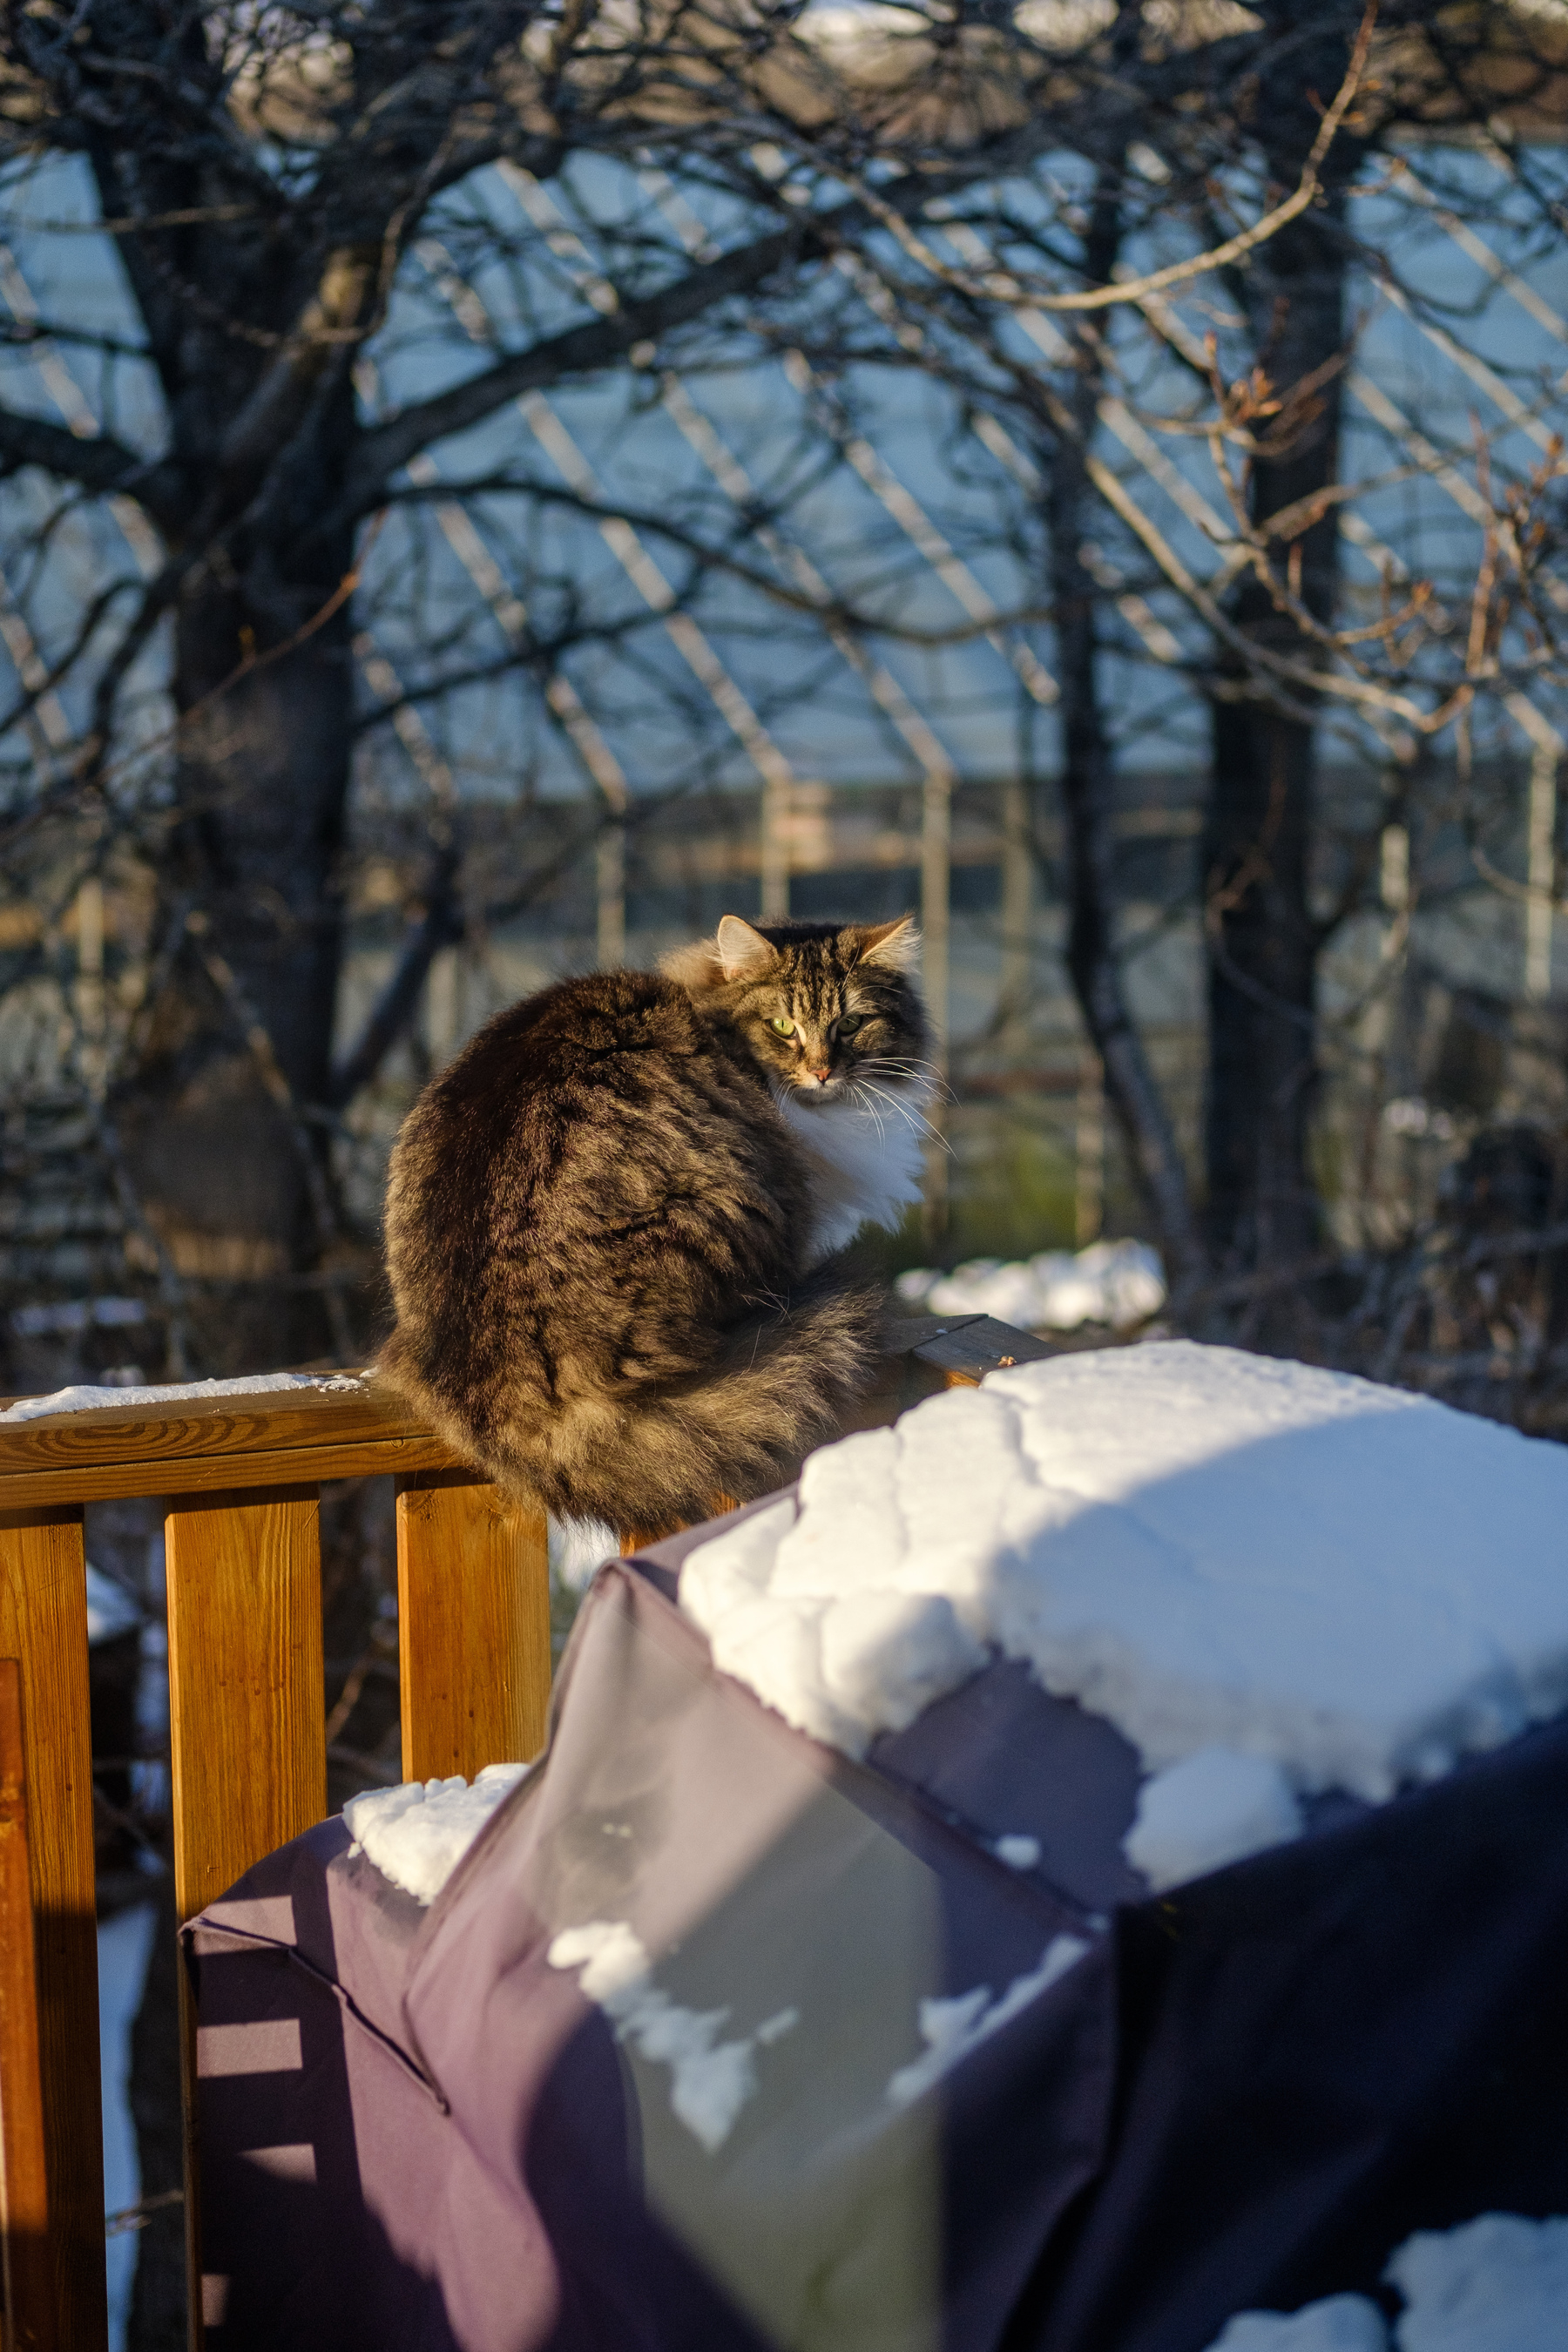 A very fluffy cat sits on the railing of my balcony. In the background you can see the commercial greenhouse next door. In the foreground there is a snow-covered barbecue